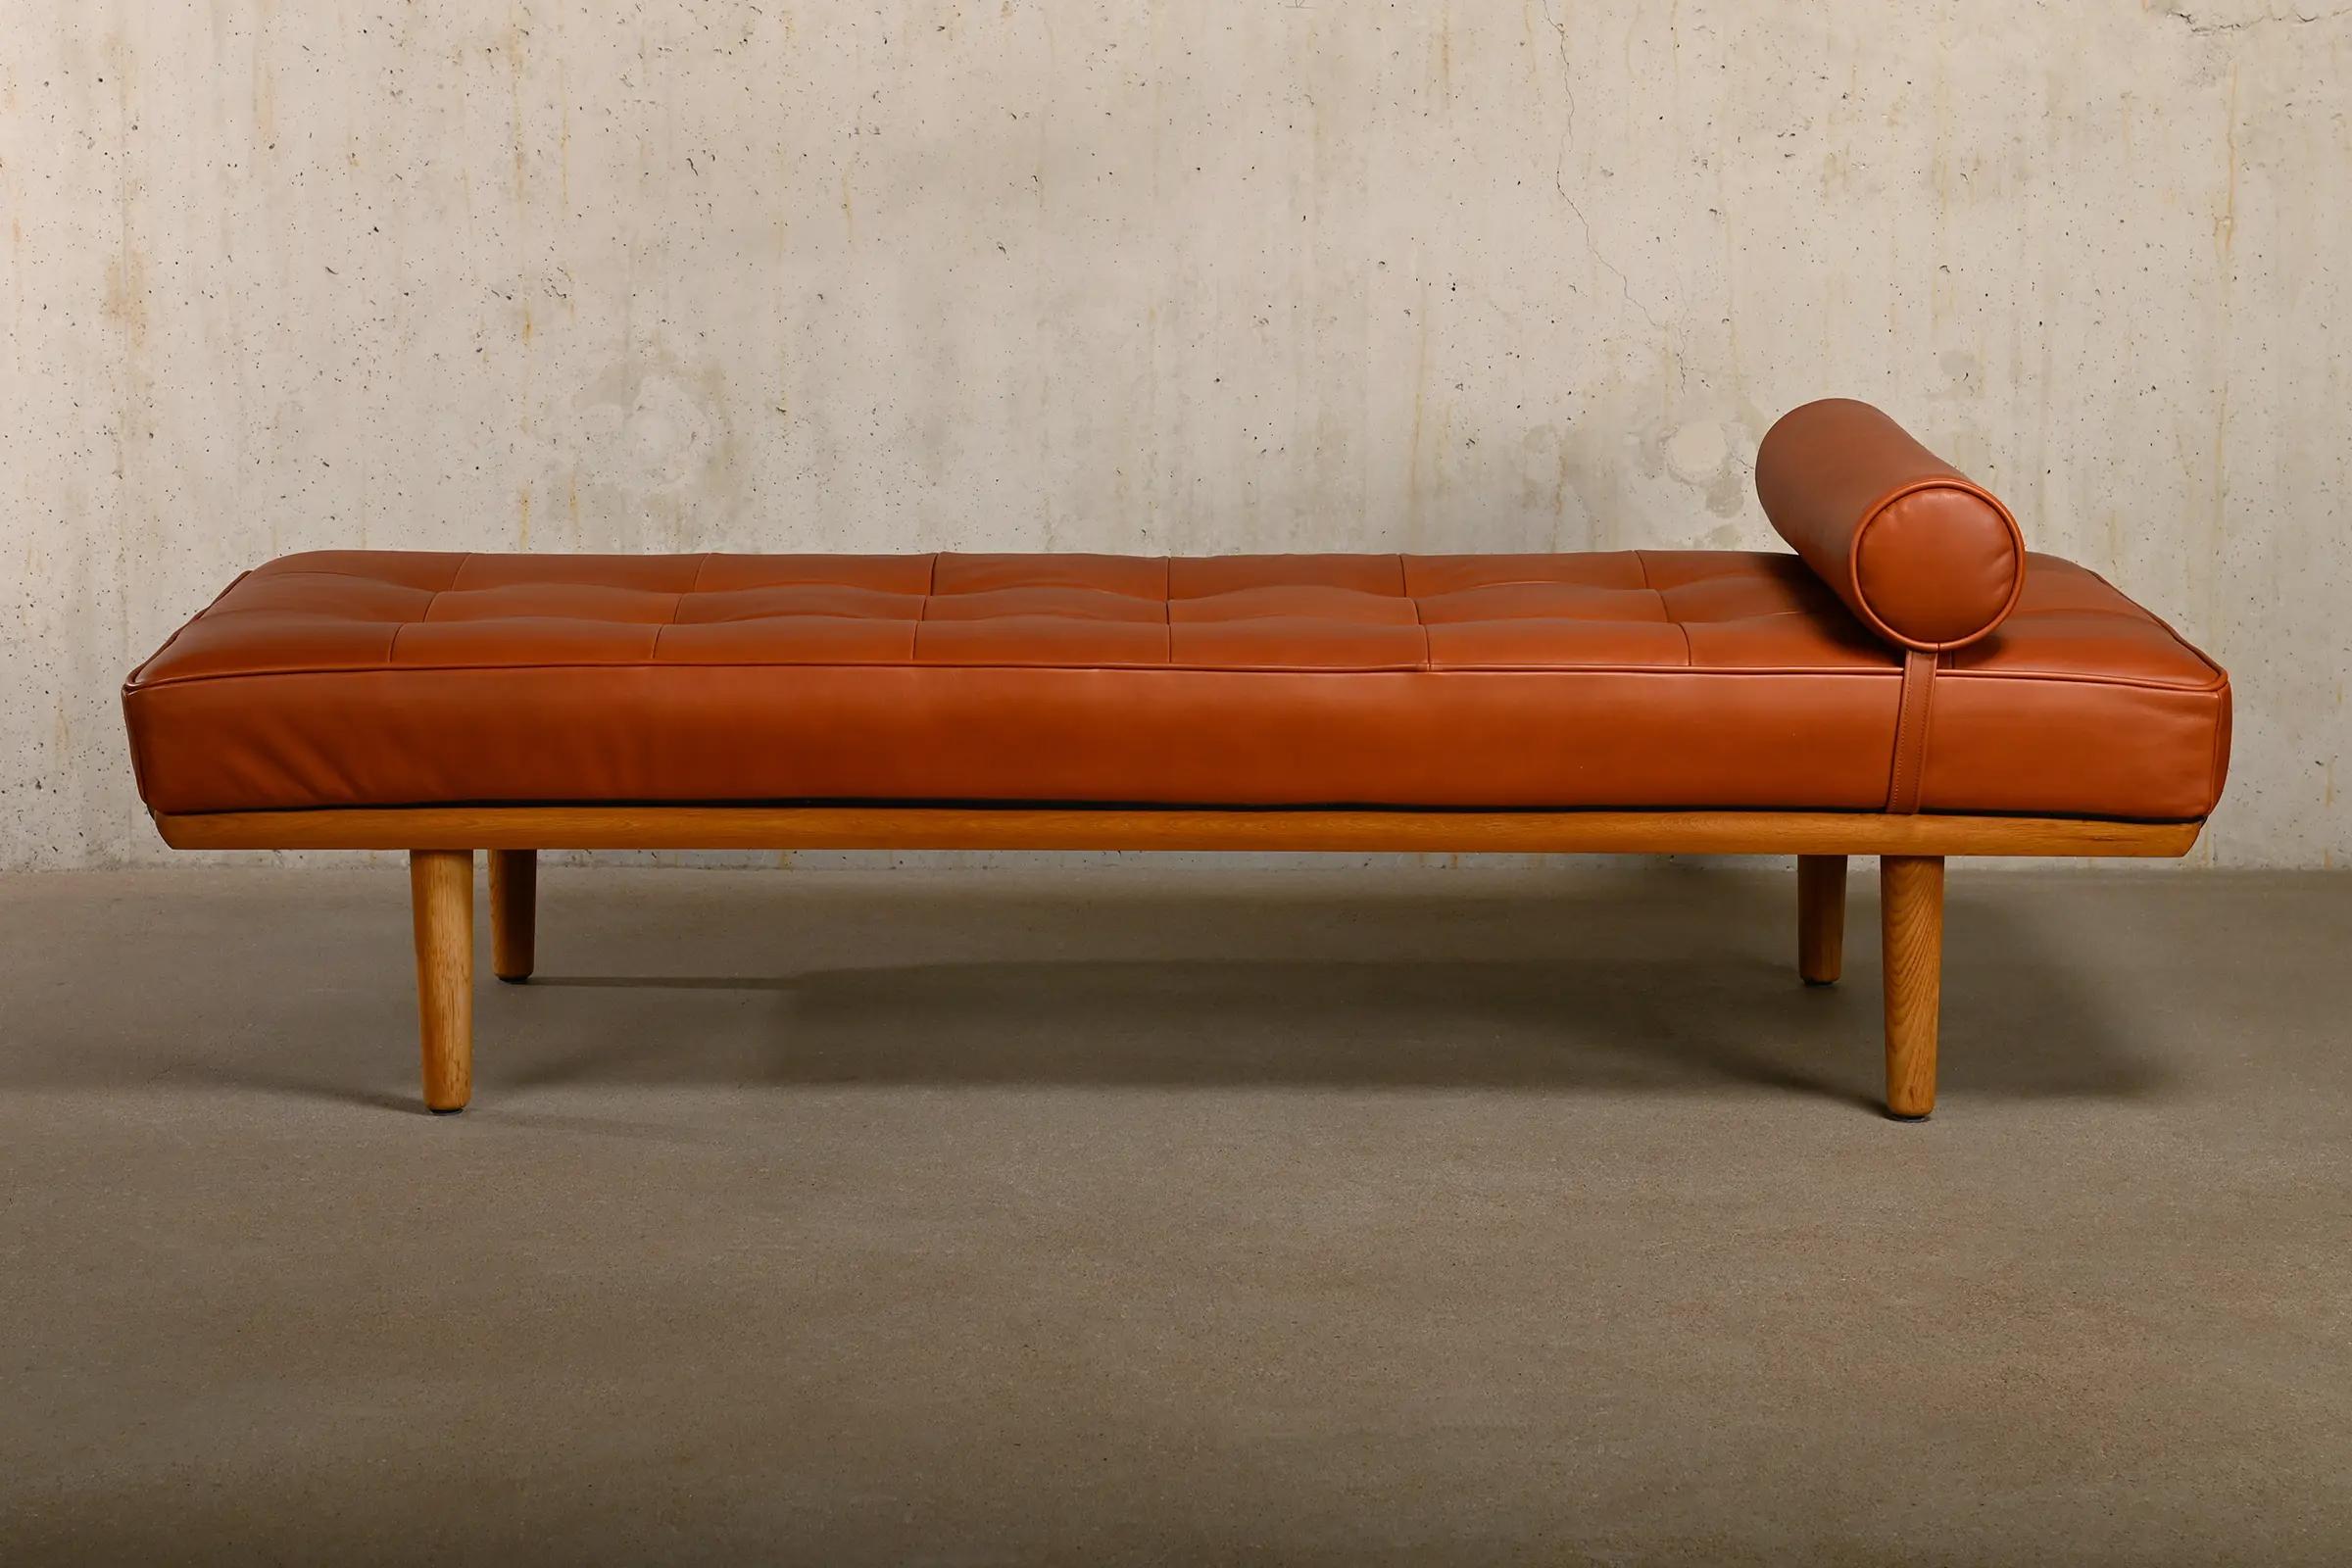 Mid-20th Century Hans J. Wegner GE19 Daybed with Oak and Cognac Leather for Getama Denmark 1960s